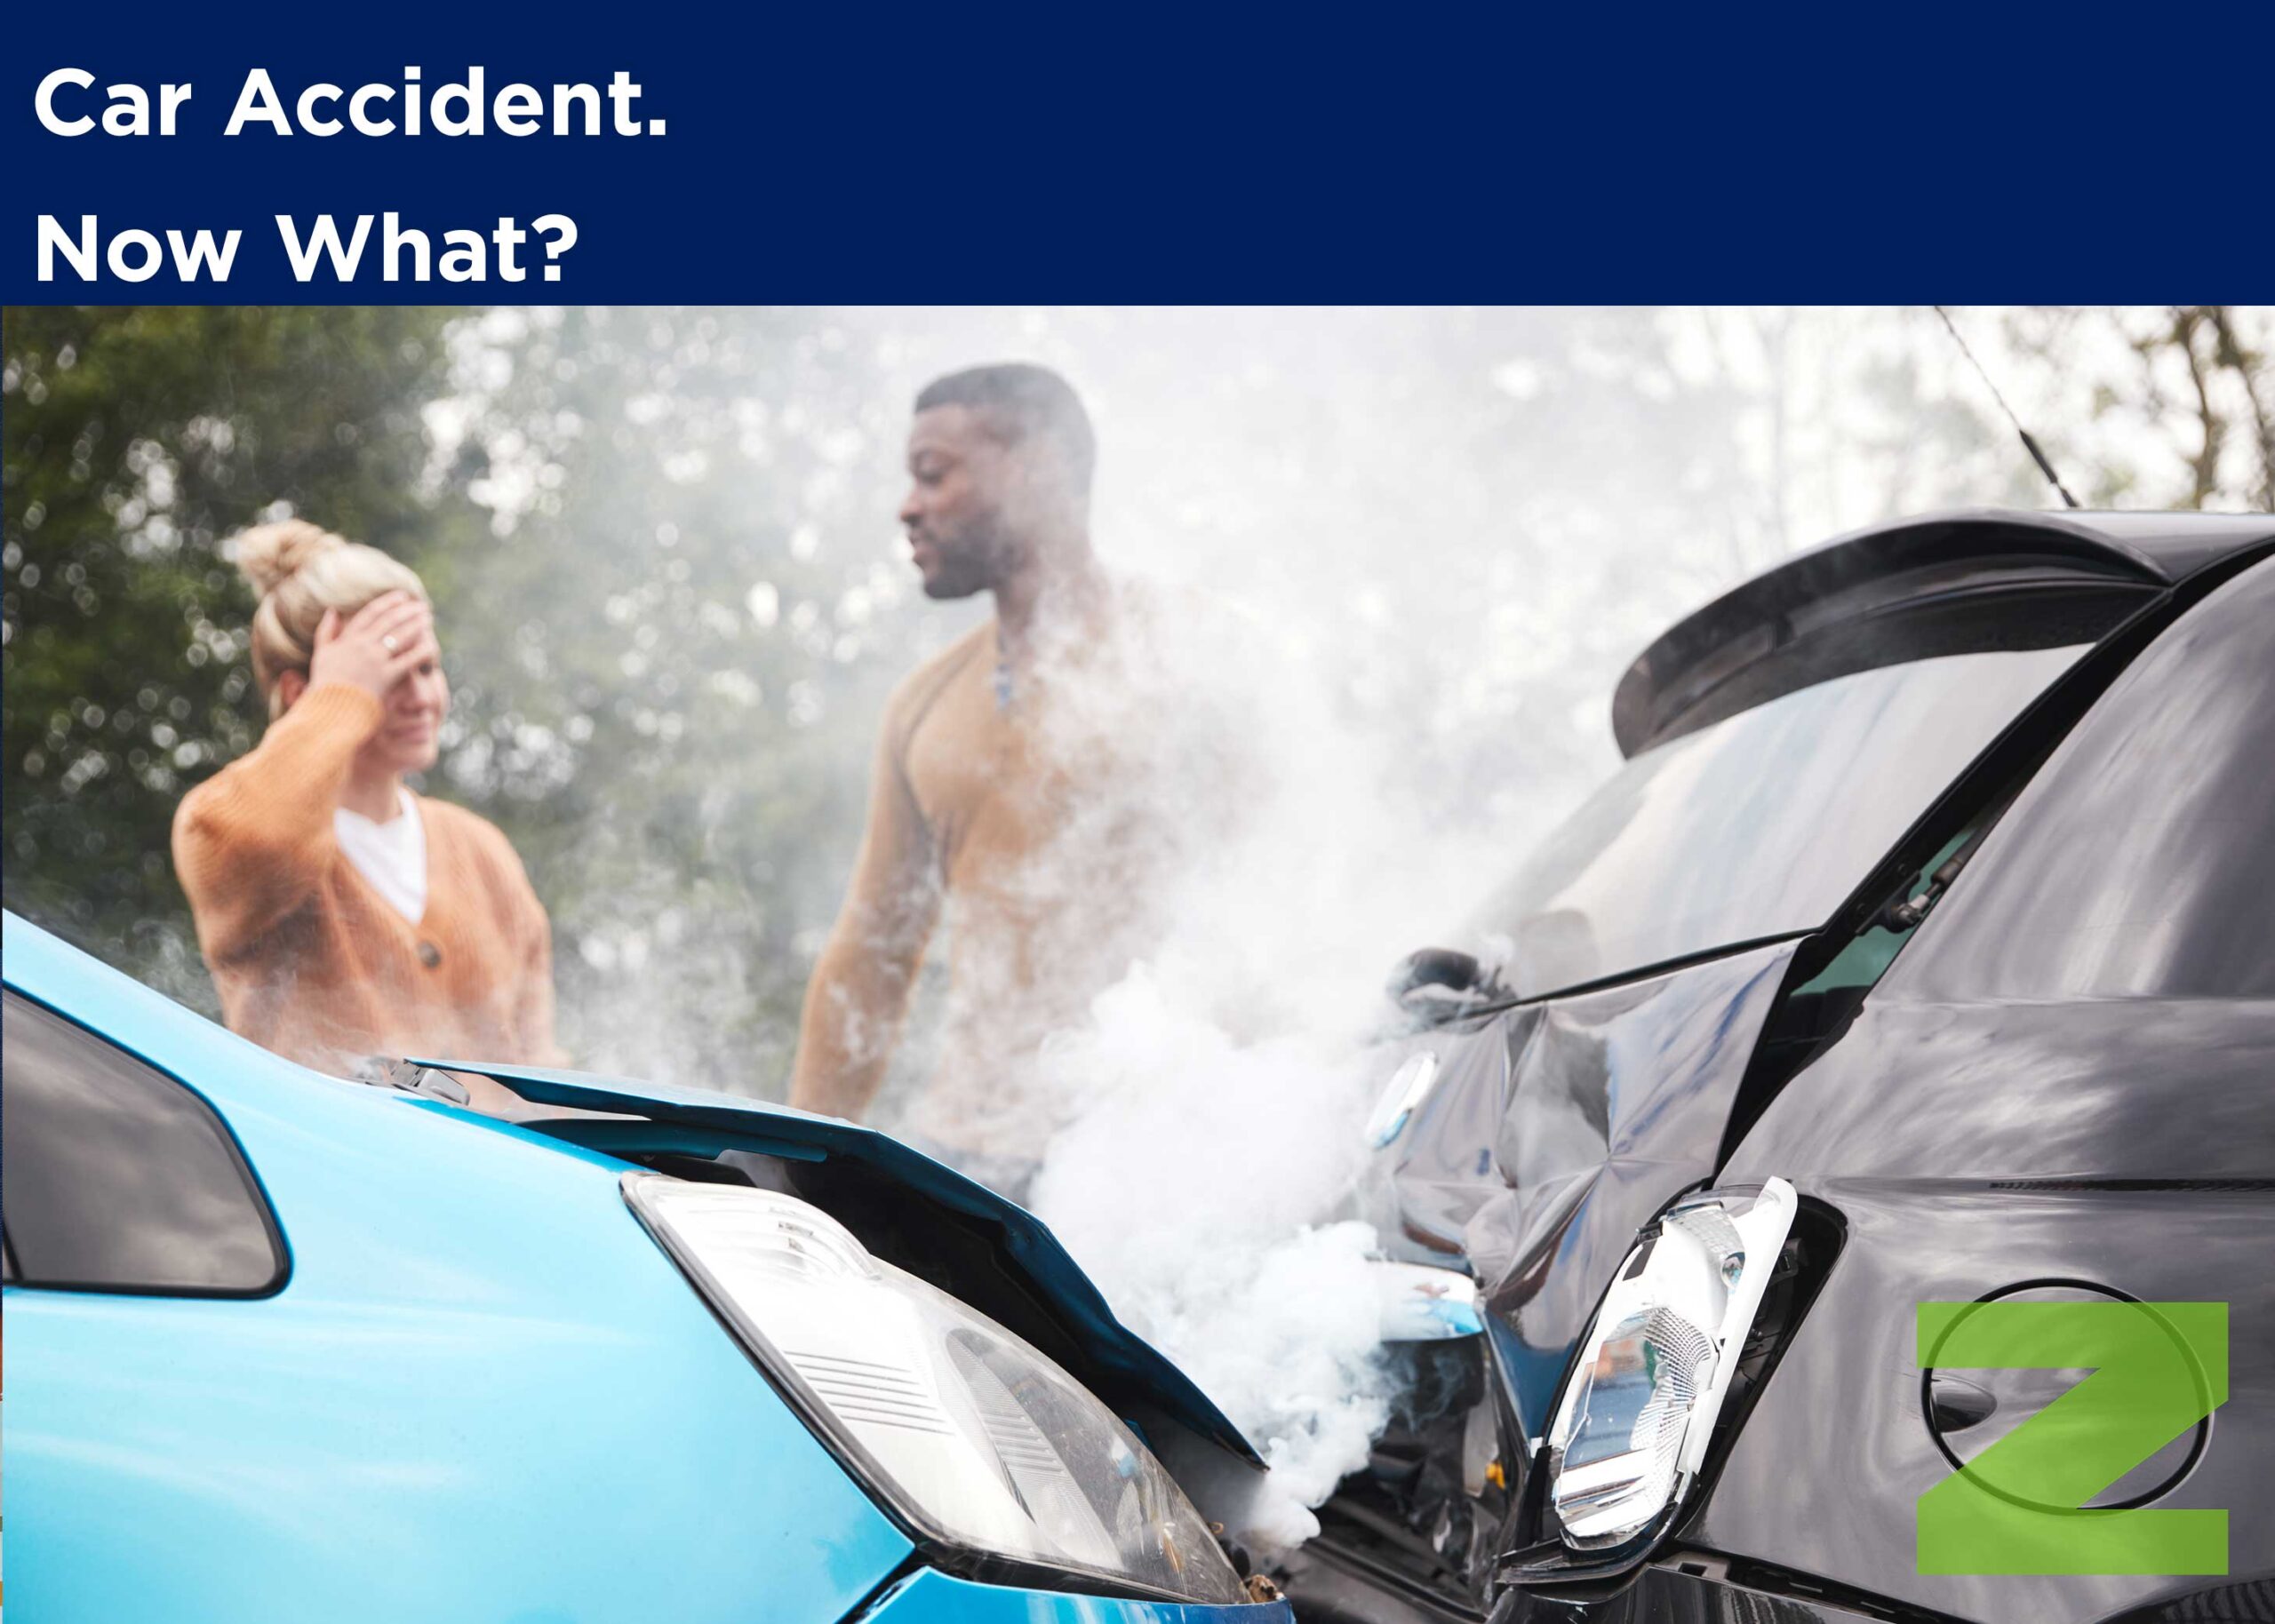 You Just Got into a Car Accident. Now What?